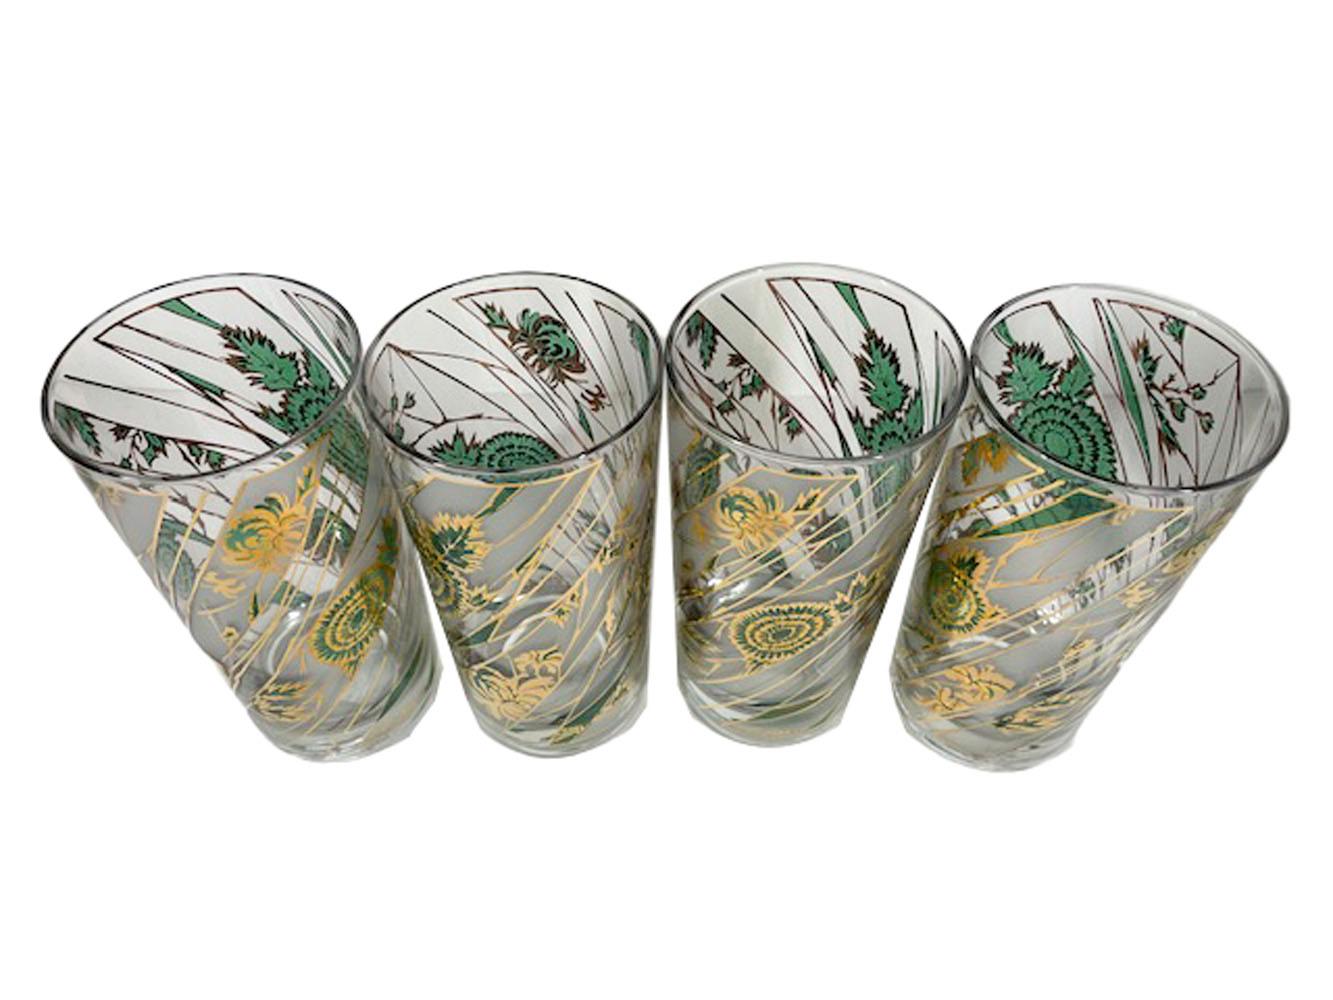 Vintage set of 16 cocktail glasses signed in script Culver, LTD. Eight each highball and double rocks glasses decorated with an abstract design of diagonal frosted and clear stripes with gold edge lines as well as random patterns of gold lines